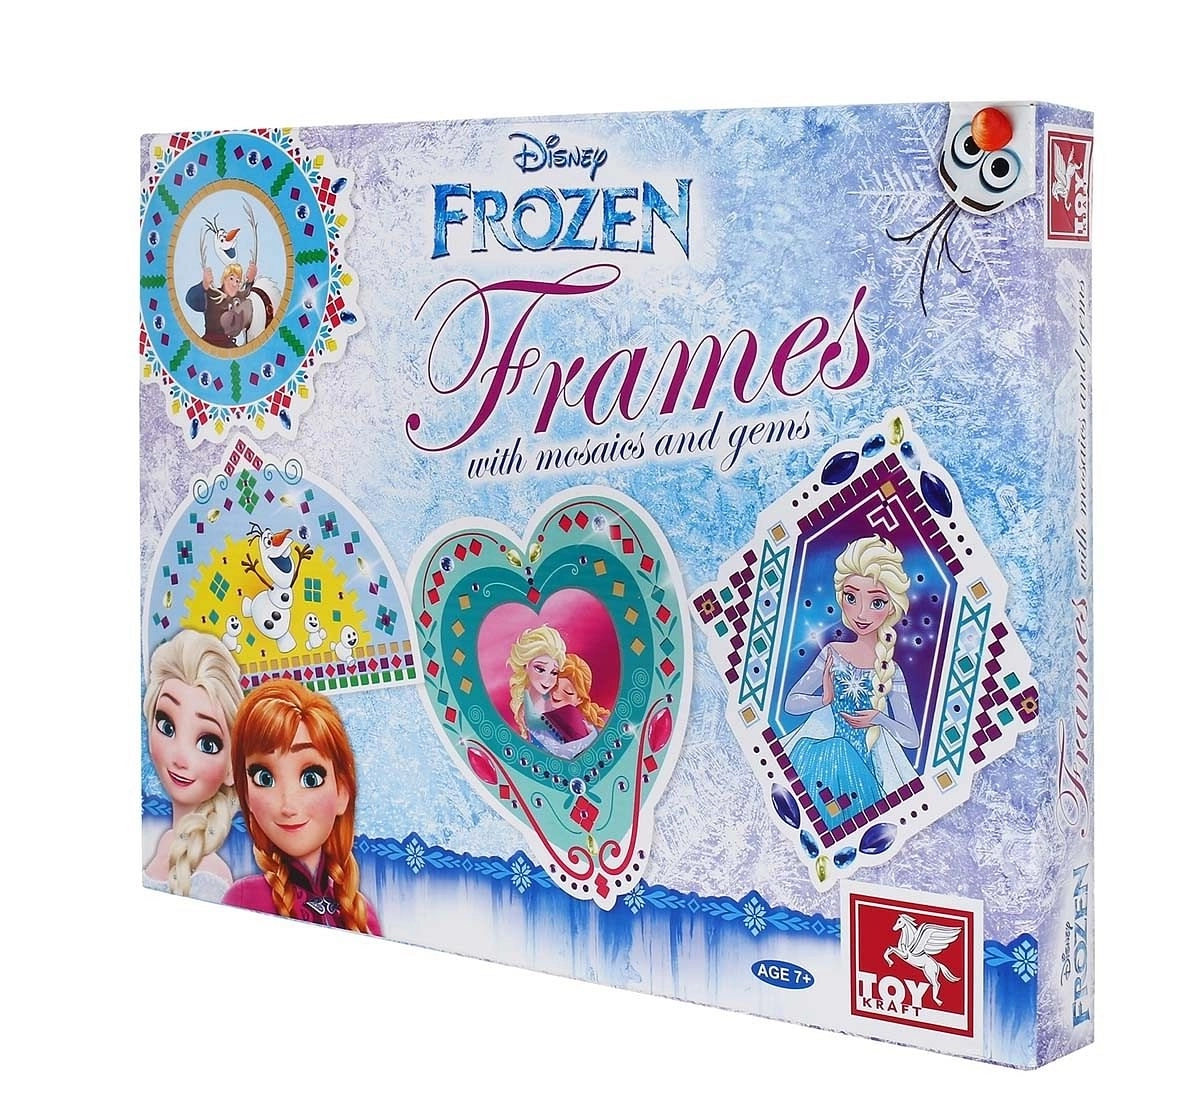 Toy Kraft Disney Frozen Frames With Mosaic and Gems, Multi Color DIY Art & Craft Kits for Kids age 7Y+ 